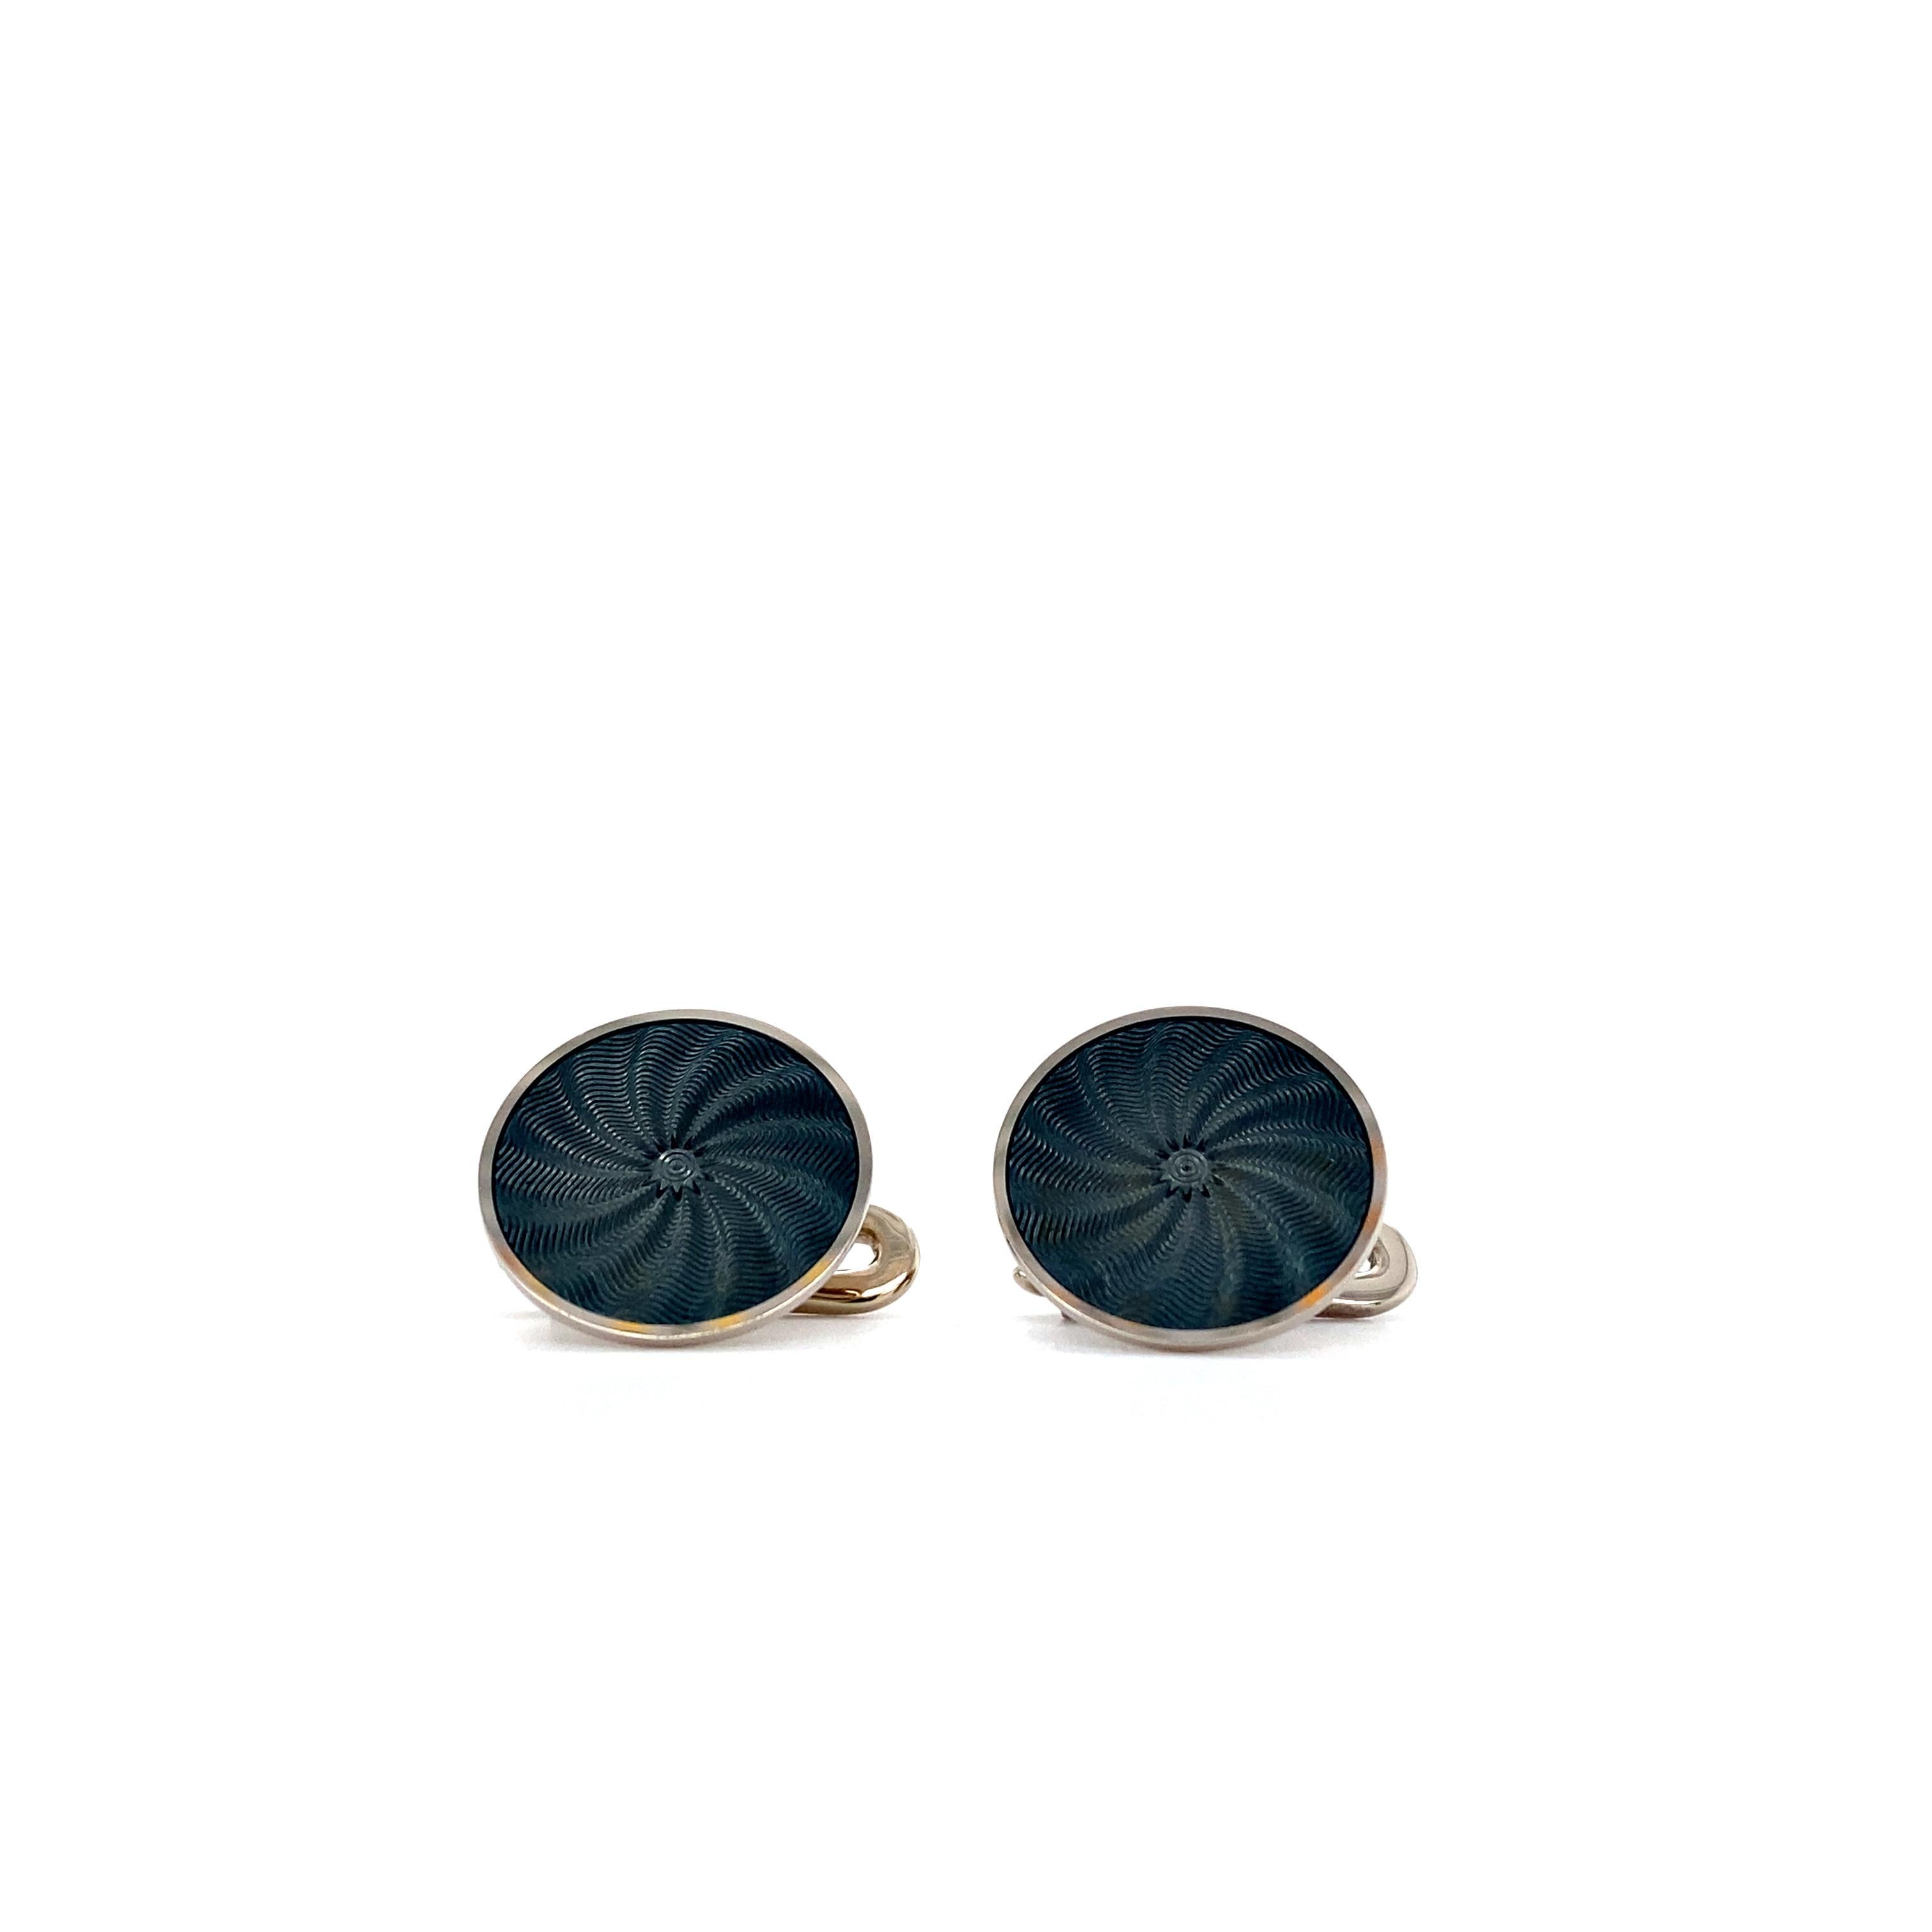 Victor Mayer round shirt studs, Globetrotter Collection, 18k white gold, dark turquoise vitreous enamel, windmill guilloche pattern, diameter app. 14.8 mm

About the creator Victor Mayer
Victor Mayer is internationally renowned for elegant timeless